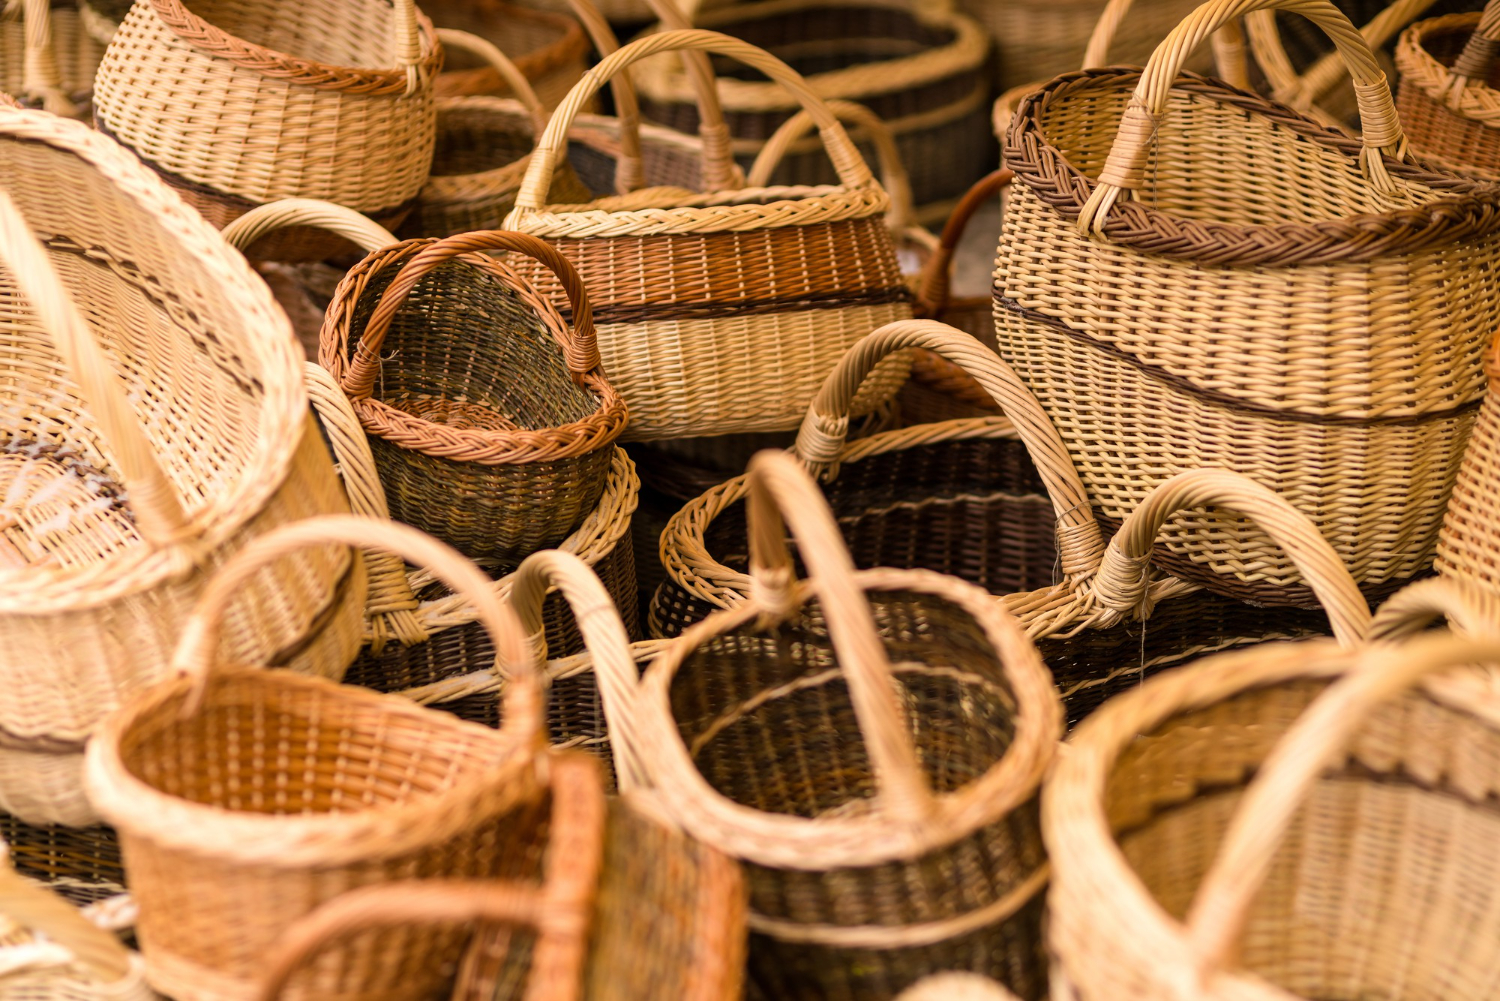 hand-made-wicker-woven-baskets-on-display-in-city-fare